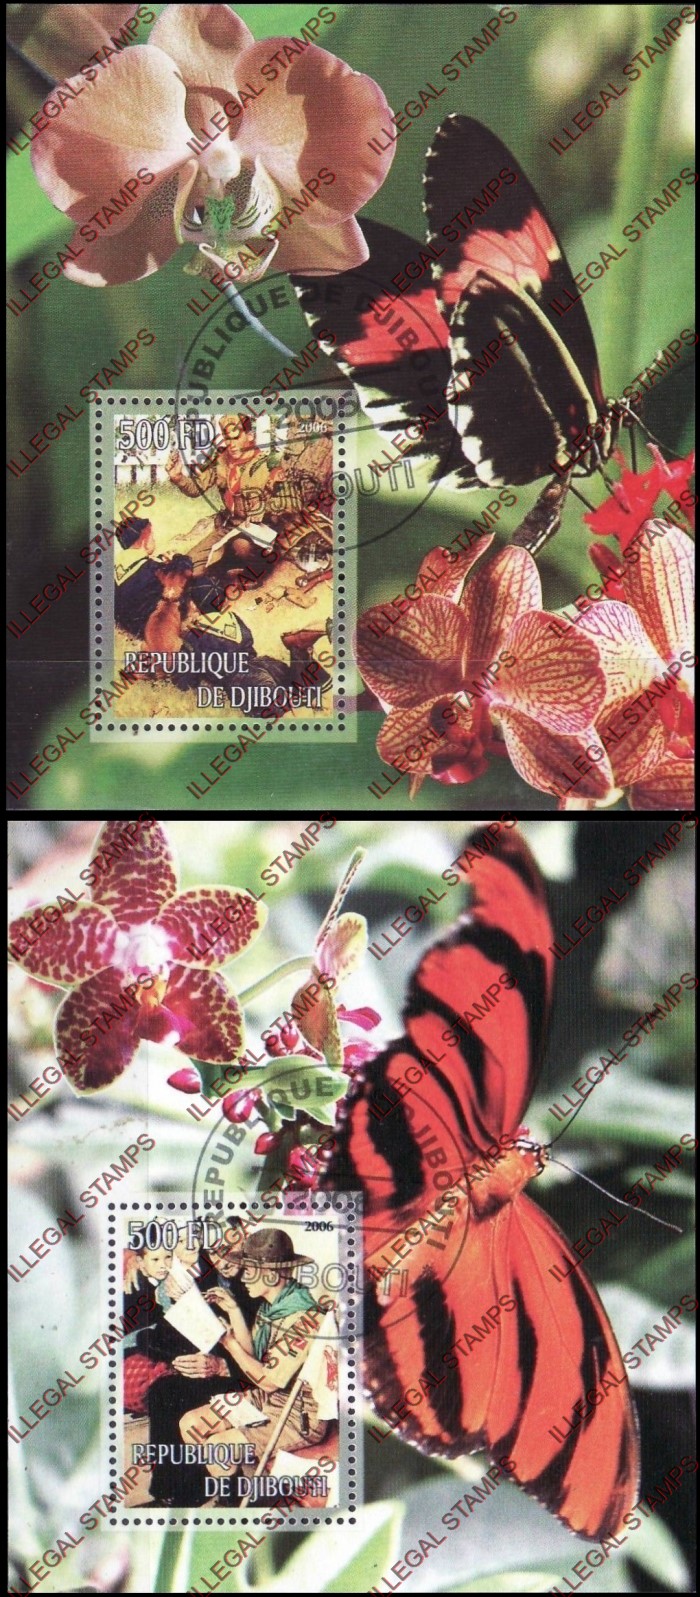 Djibouti 2006 Butterflies and Scouts Illegal Stamp Souvenir Sheets of 1